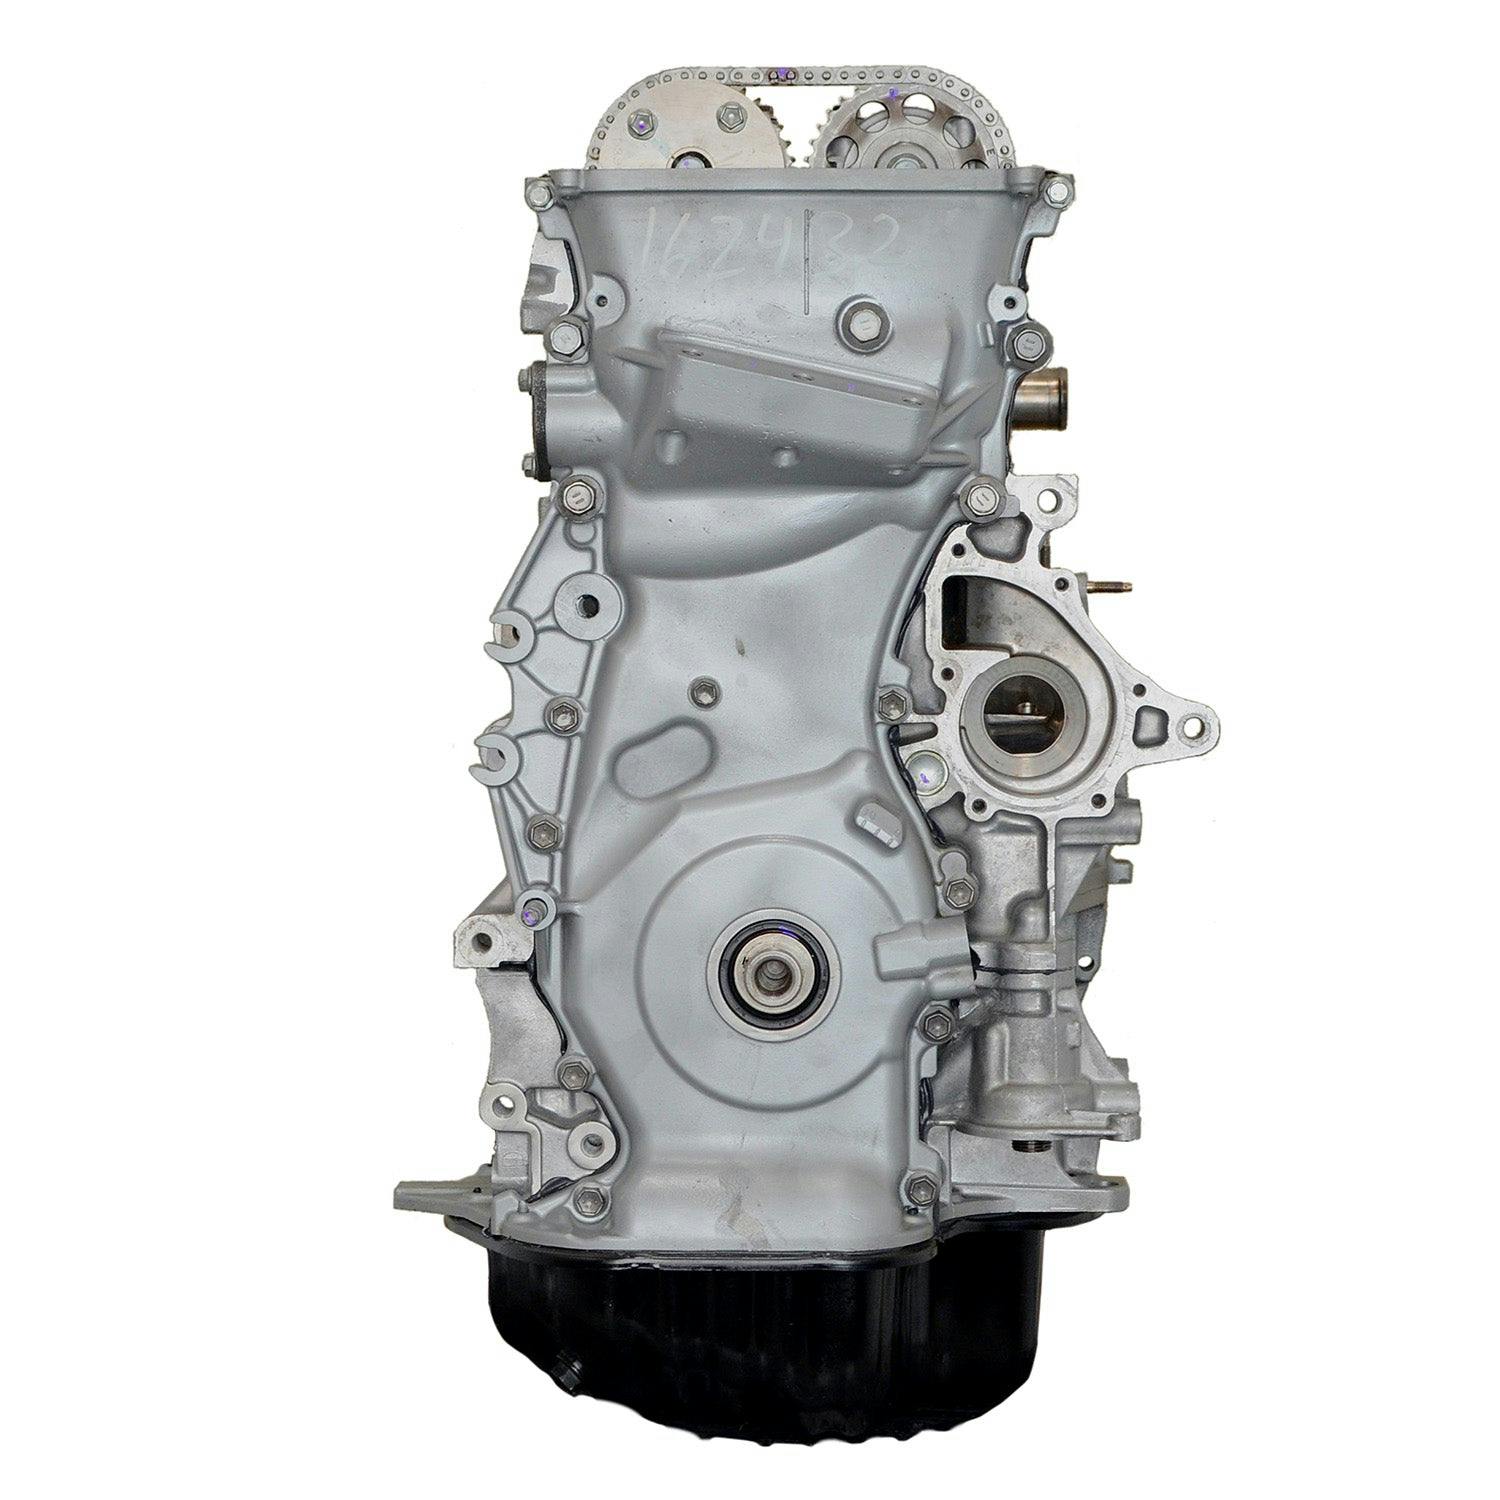 2.4L Inline-4 Engine for 2007-2009 Toyota Camry/Solara